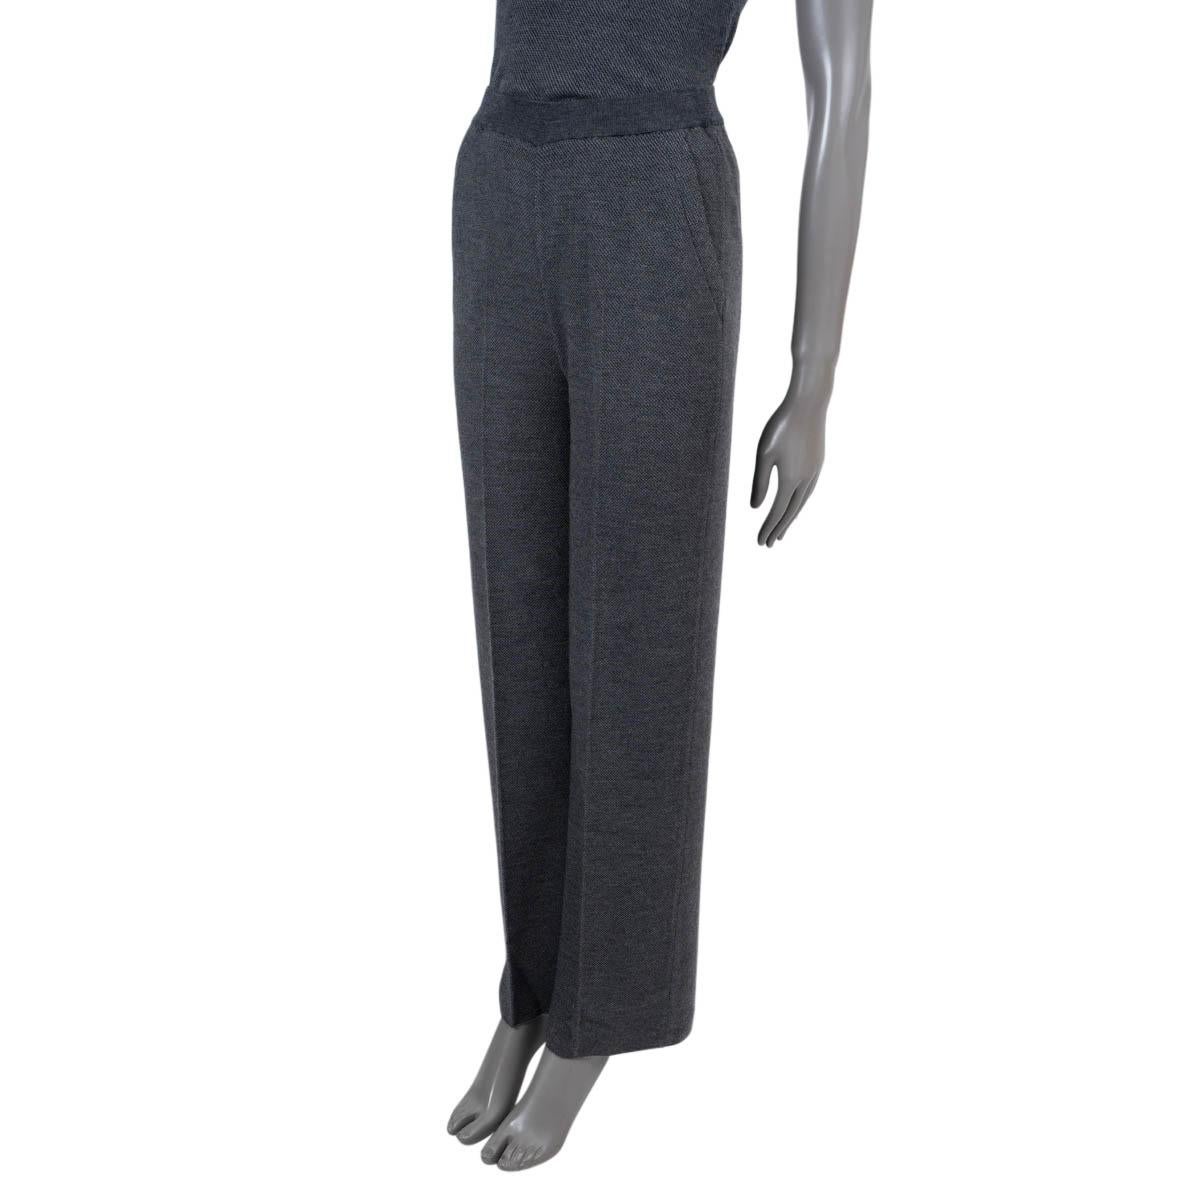 100% authentic Loro Piana wide leg pants in Grey silk (64%) and cashmere (36%). Features two slit pockets on the front and with elastic waistband. Unlined. New with tag.

Measurements
Tag Size	38
Size	XS
Waist From	54cm (21.1in)
Hips From	92cm